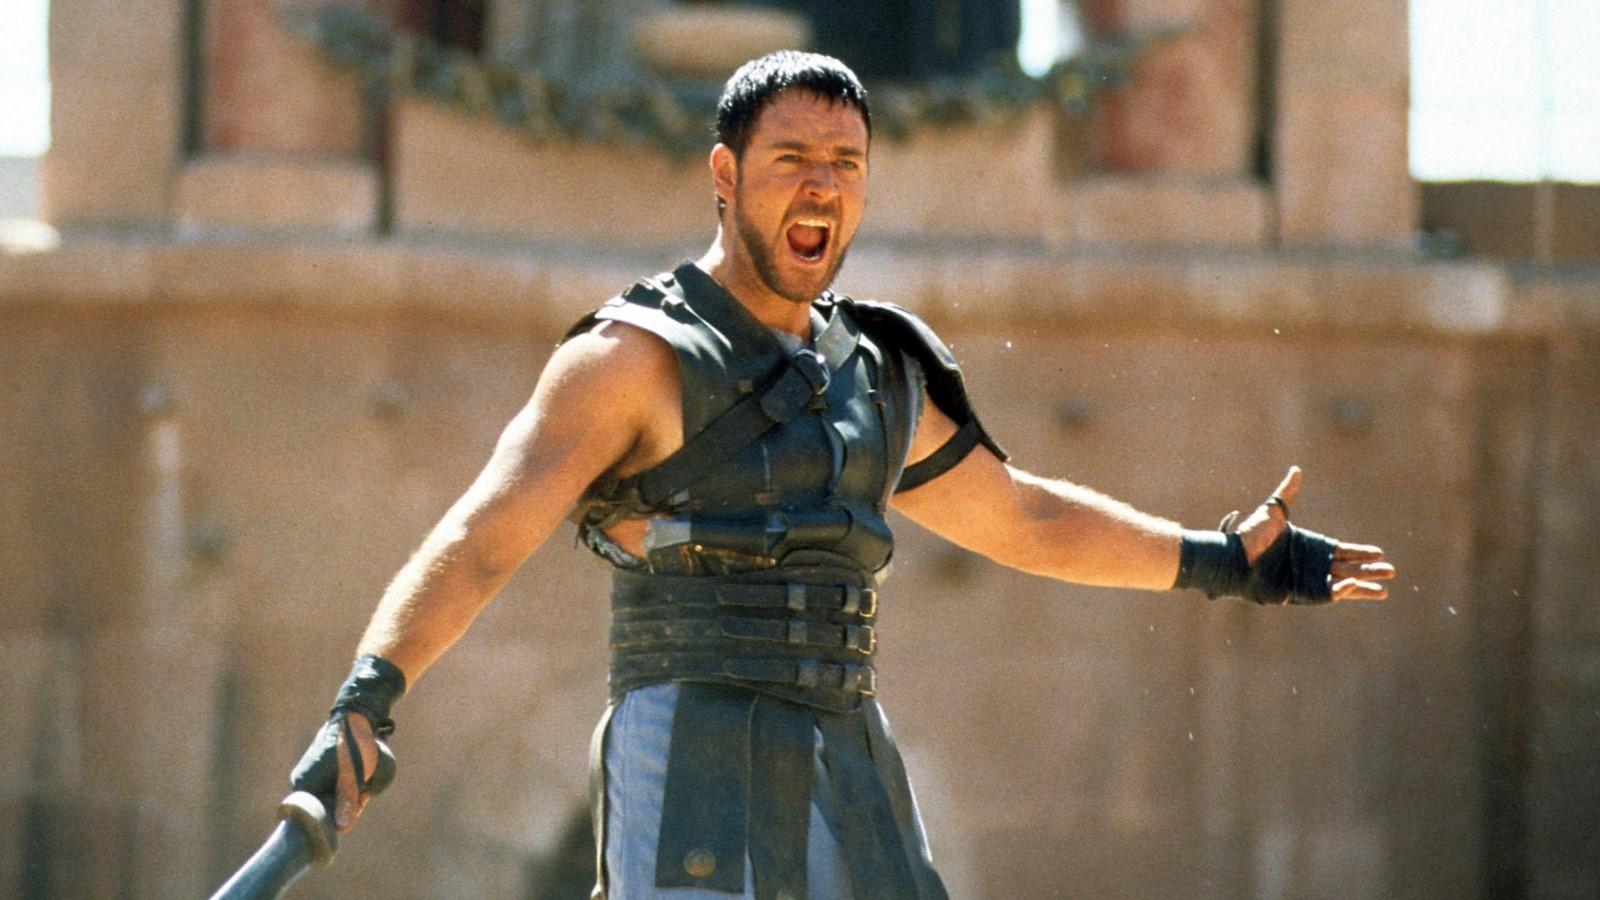 Russell Crowe as Maximus in Gladiator 2, standing in front of a crowd and yelling